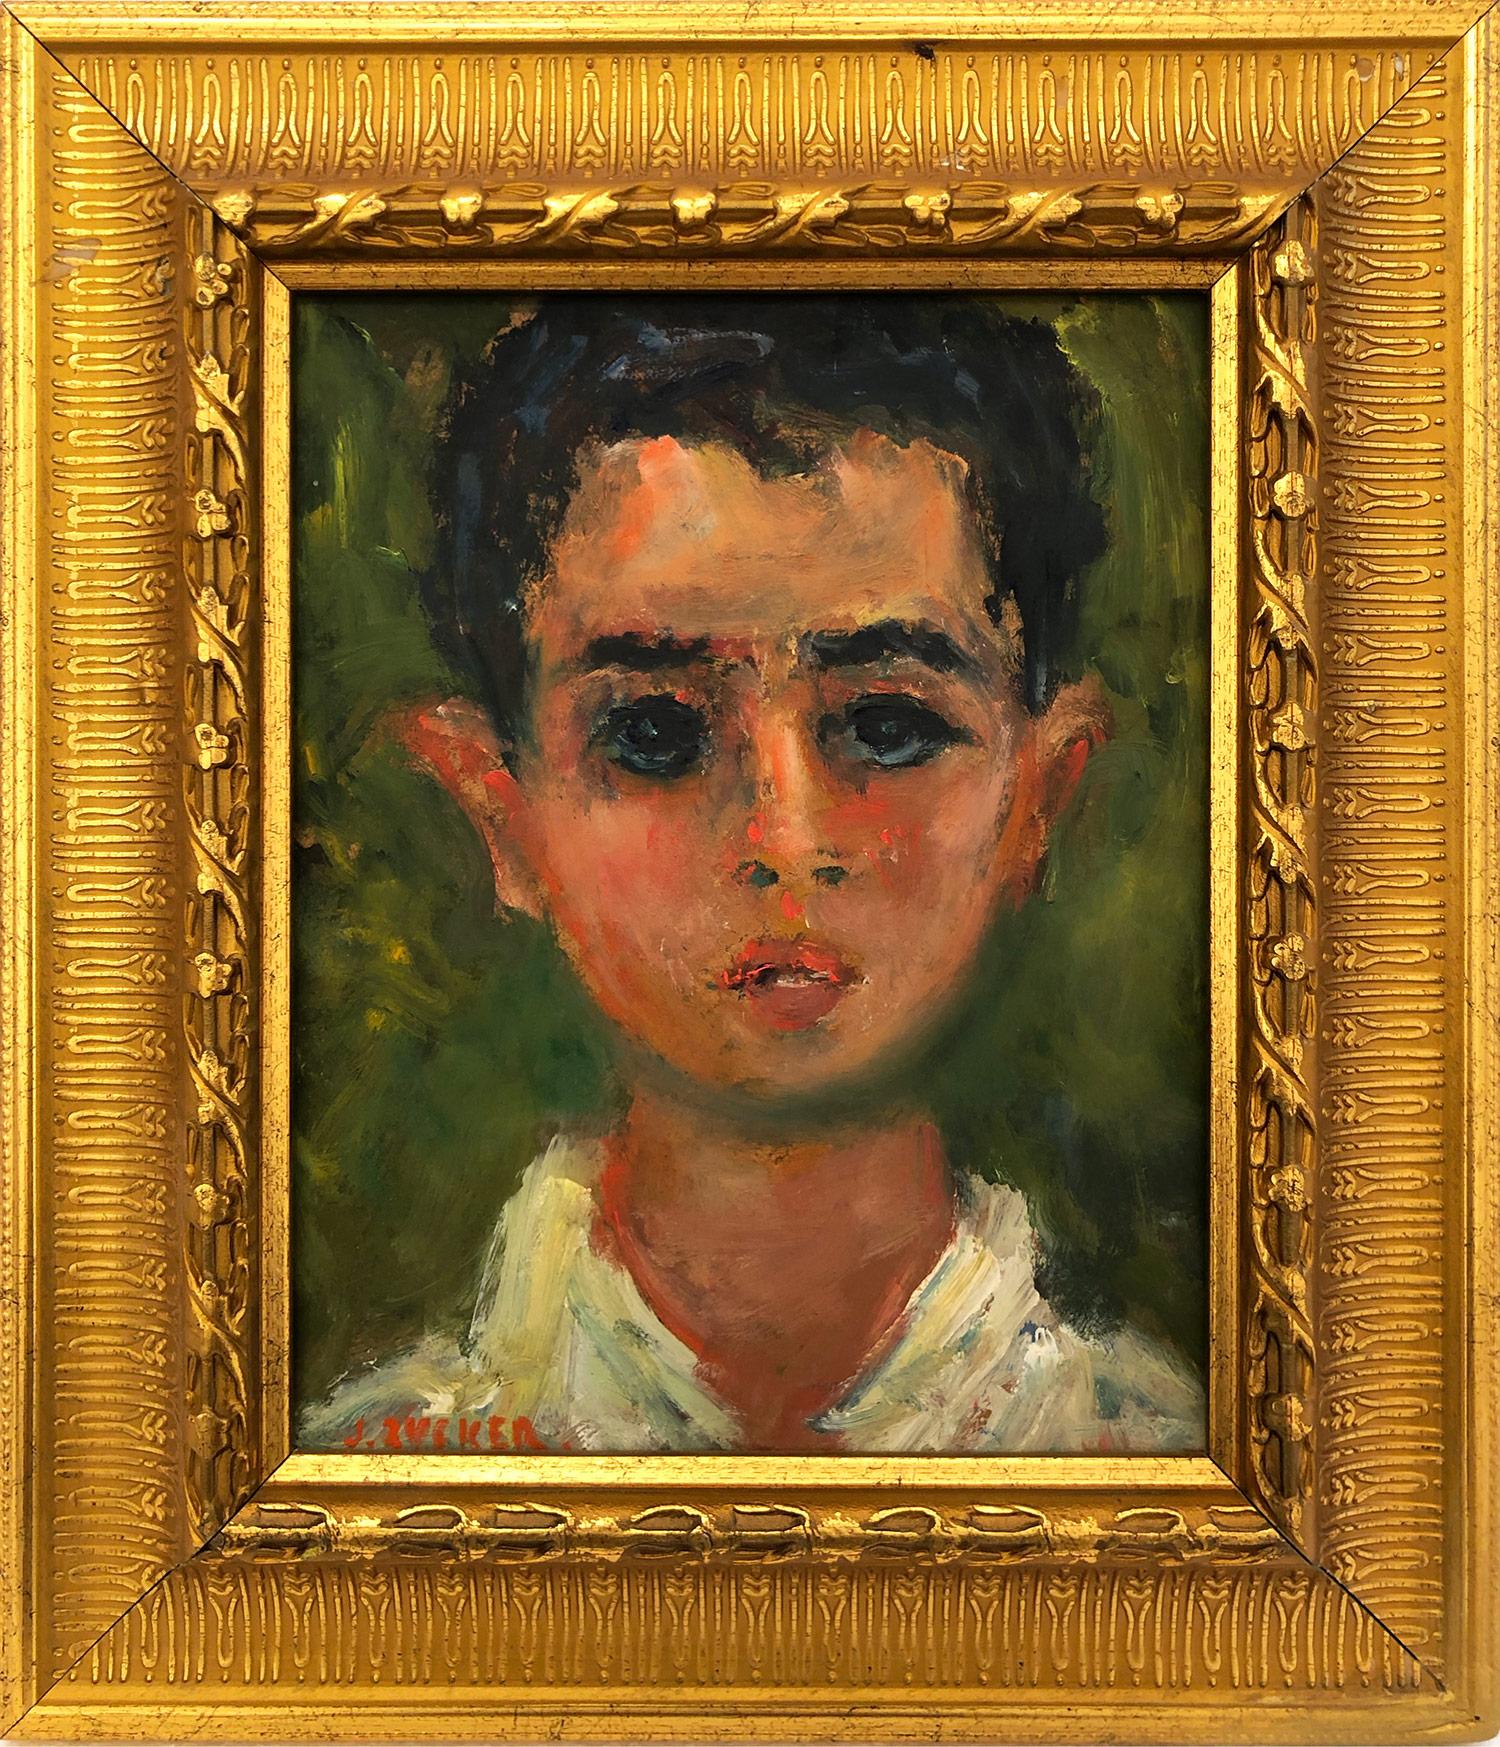 Portrait Painting Jacques Zucker - "Portrait of a Young Boy" Post-Impressionism French Oil Painting on Panel